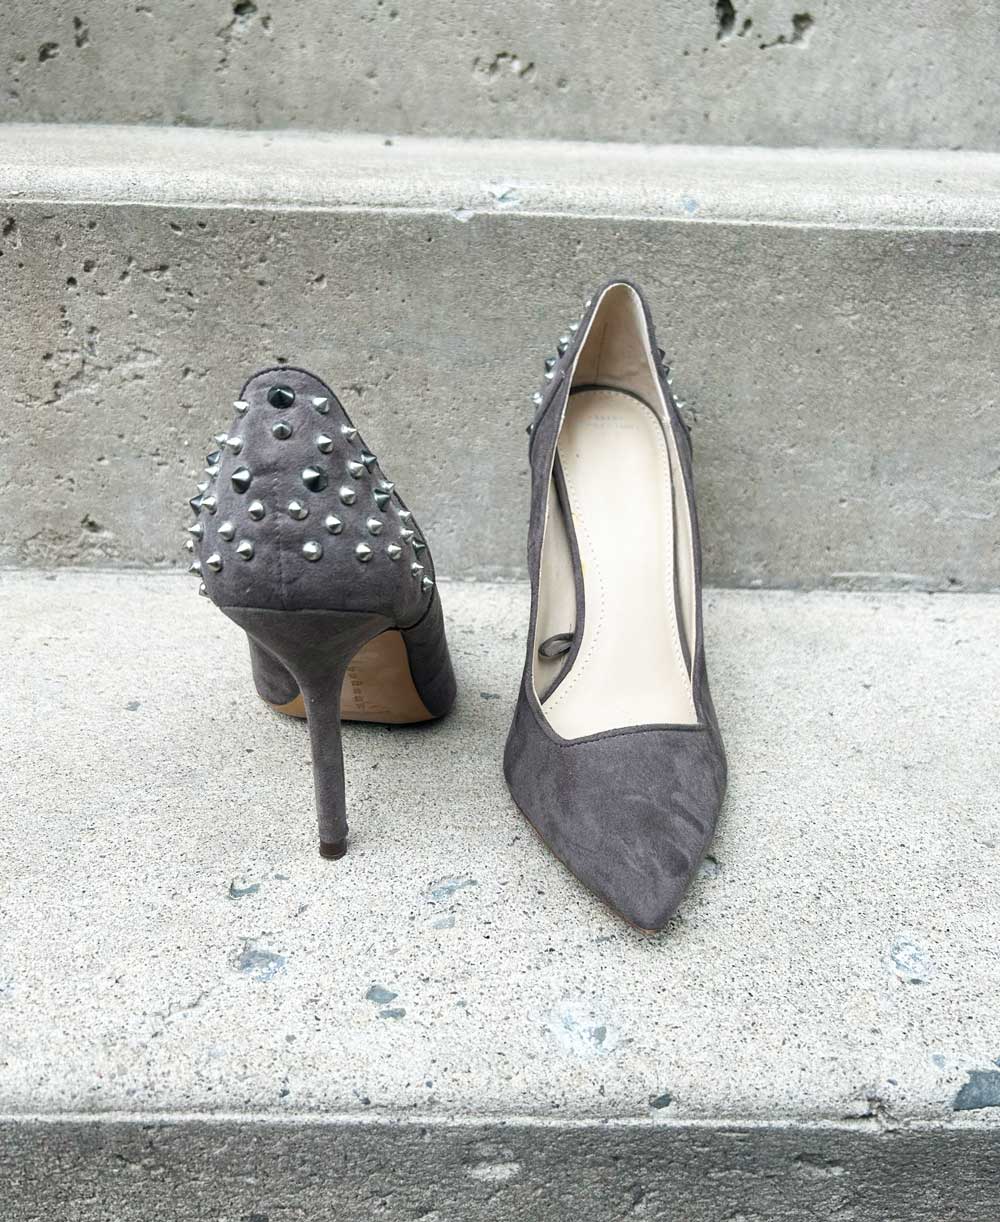 Zara Spike Heels - BY THE PEOPLE SHOP | PAUSE MORE, LIVE MORE